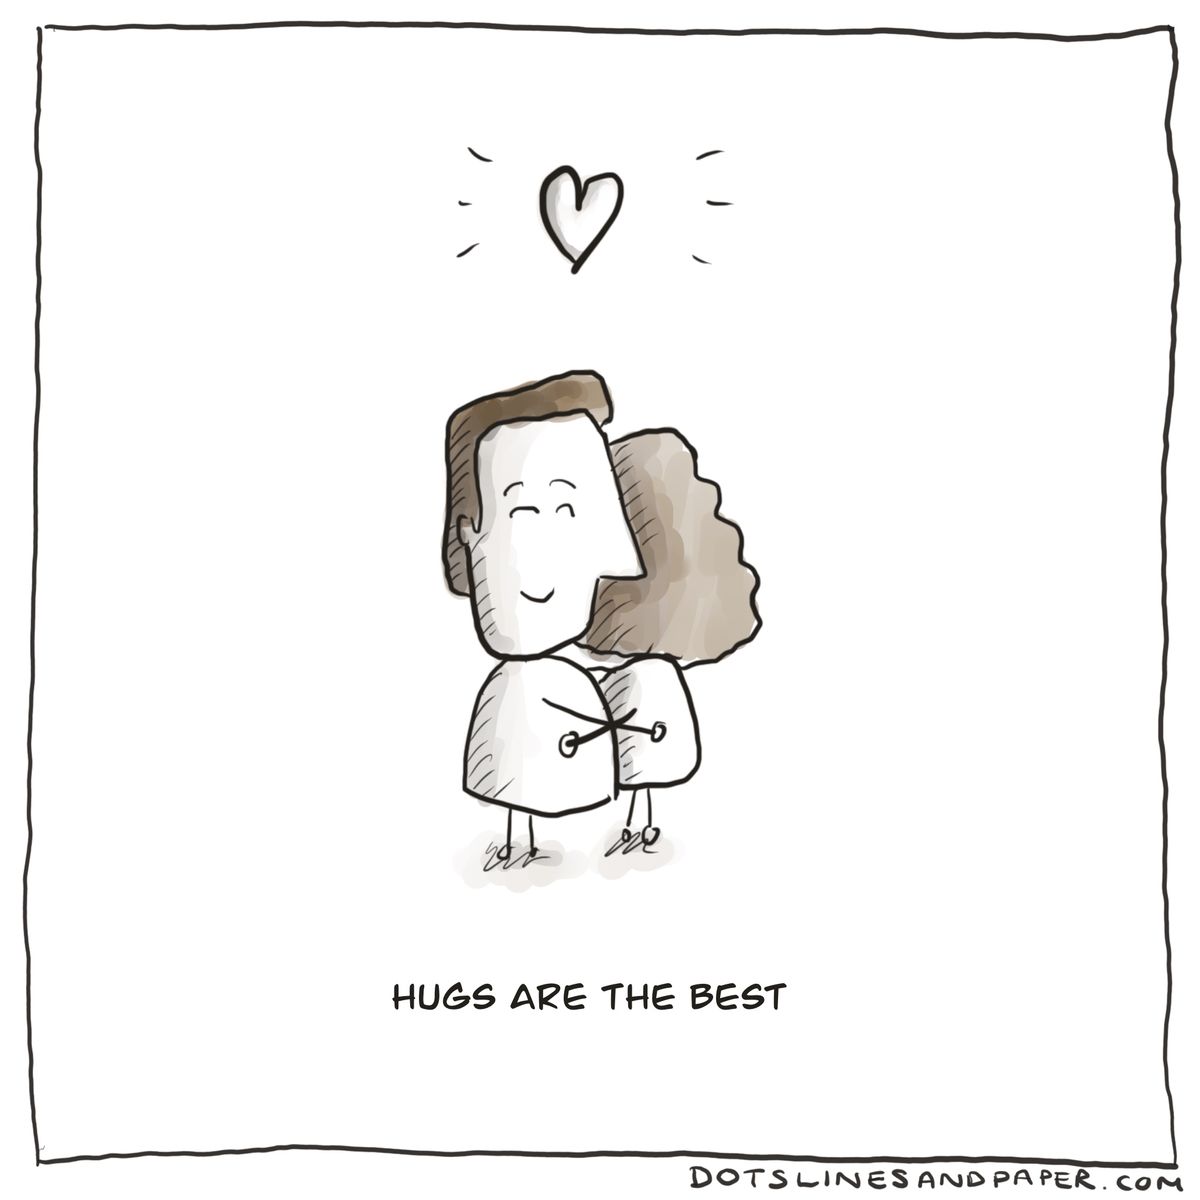 Hugs are the best